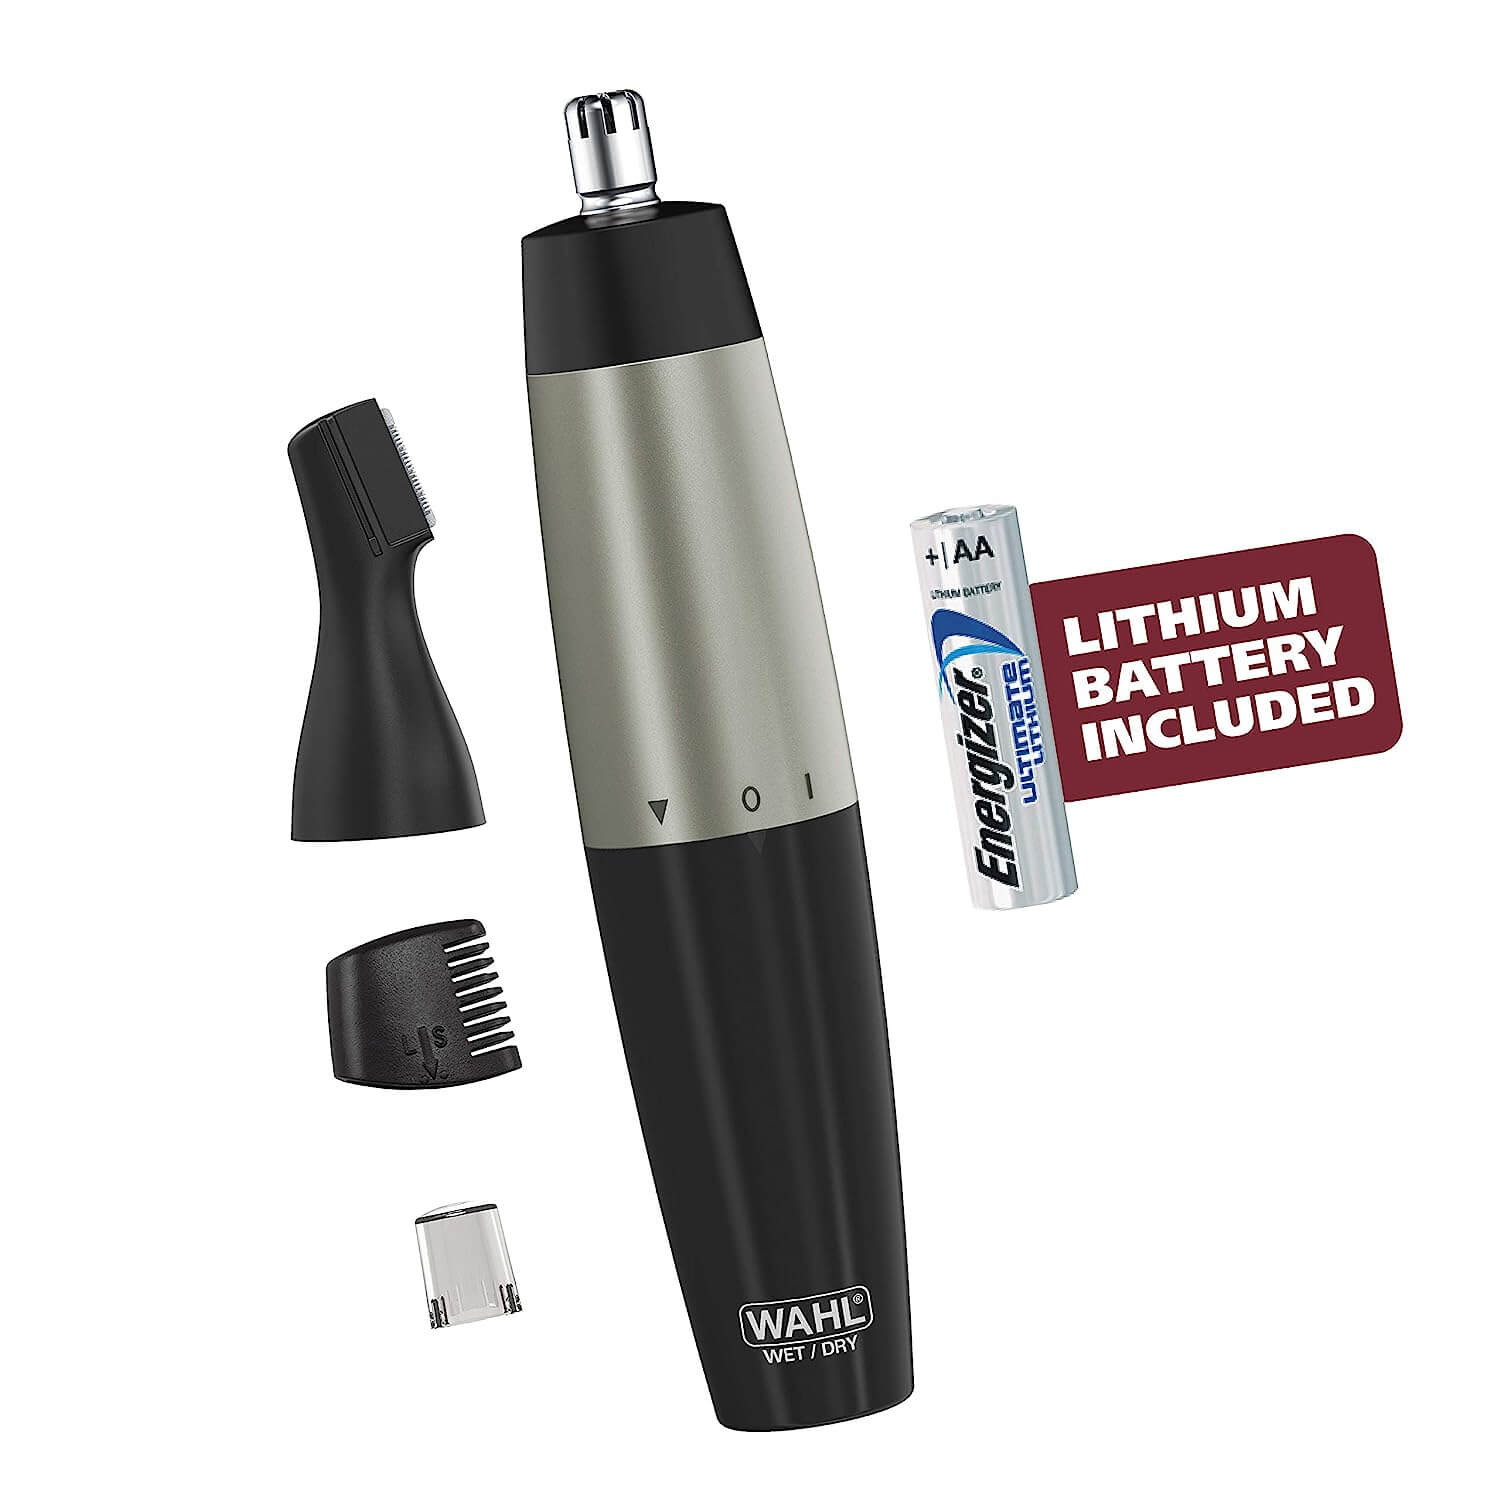 Wahl Ear, Nose, & Brow Cordless Battery Trimmer